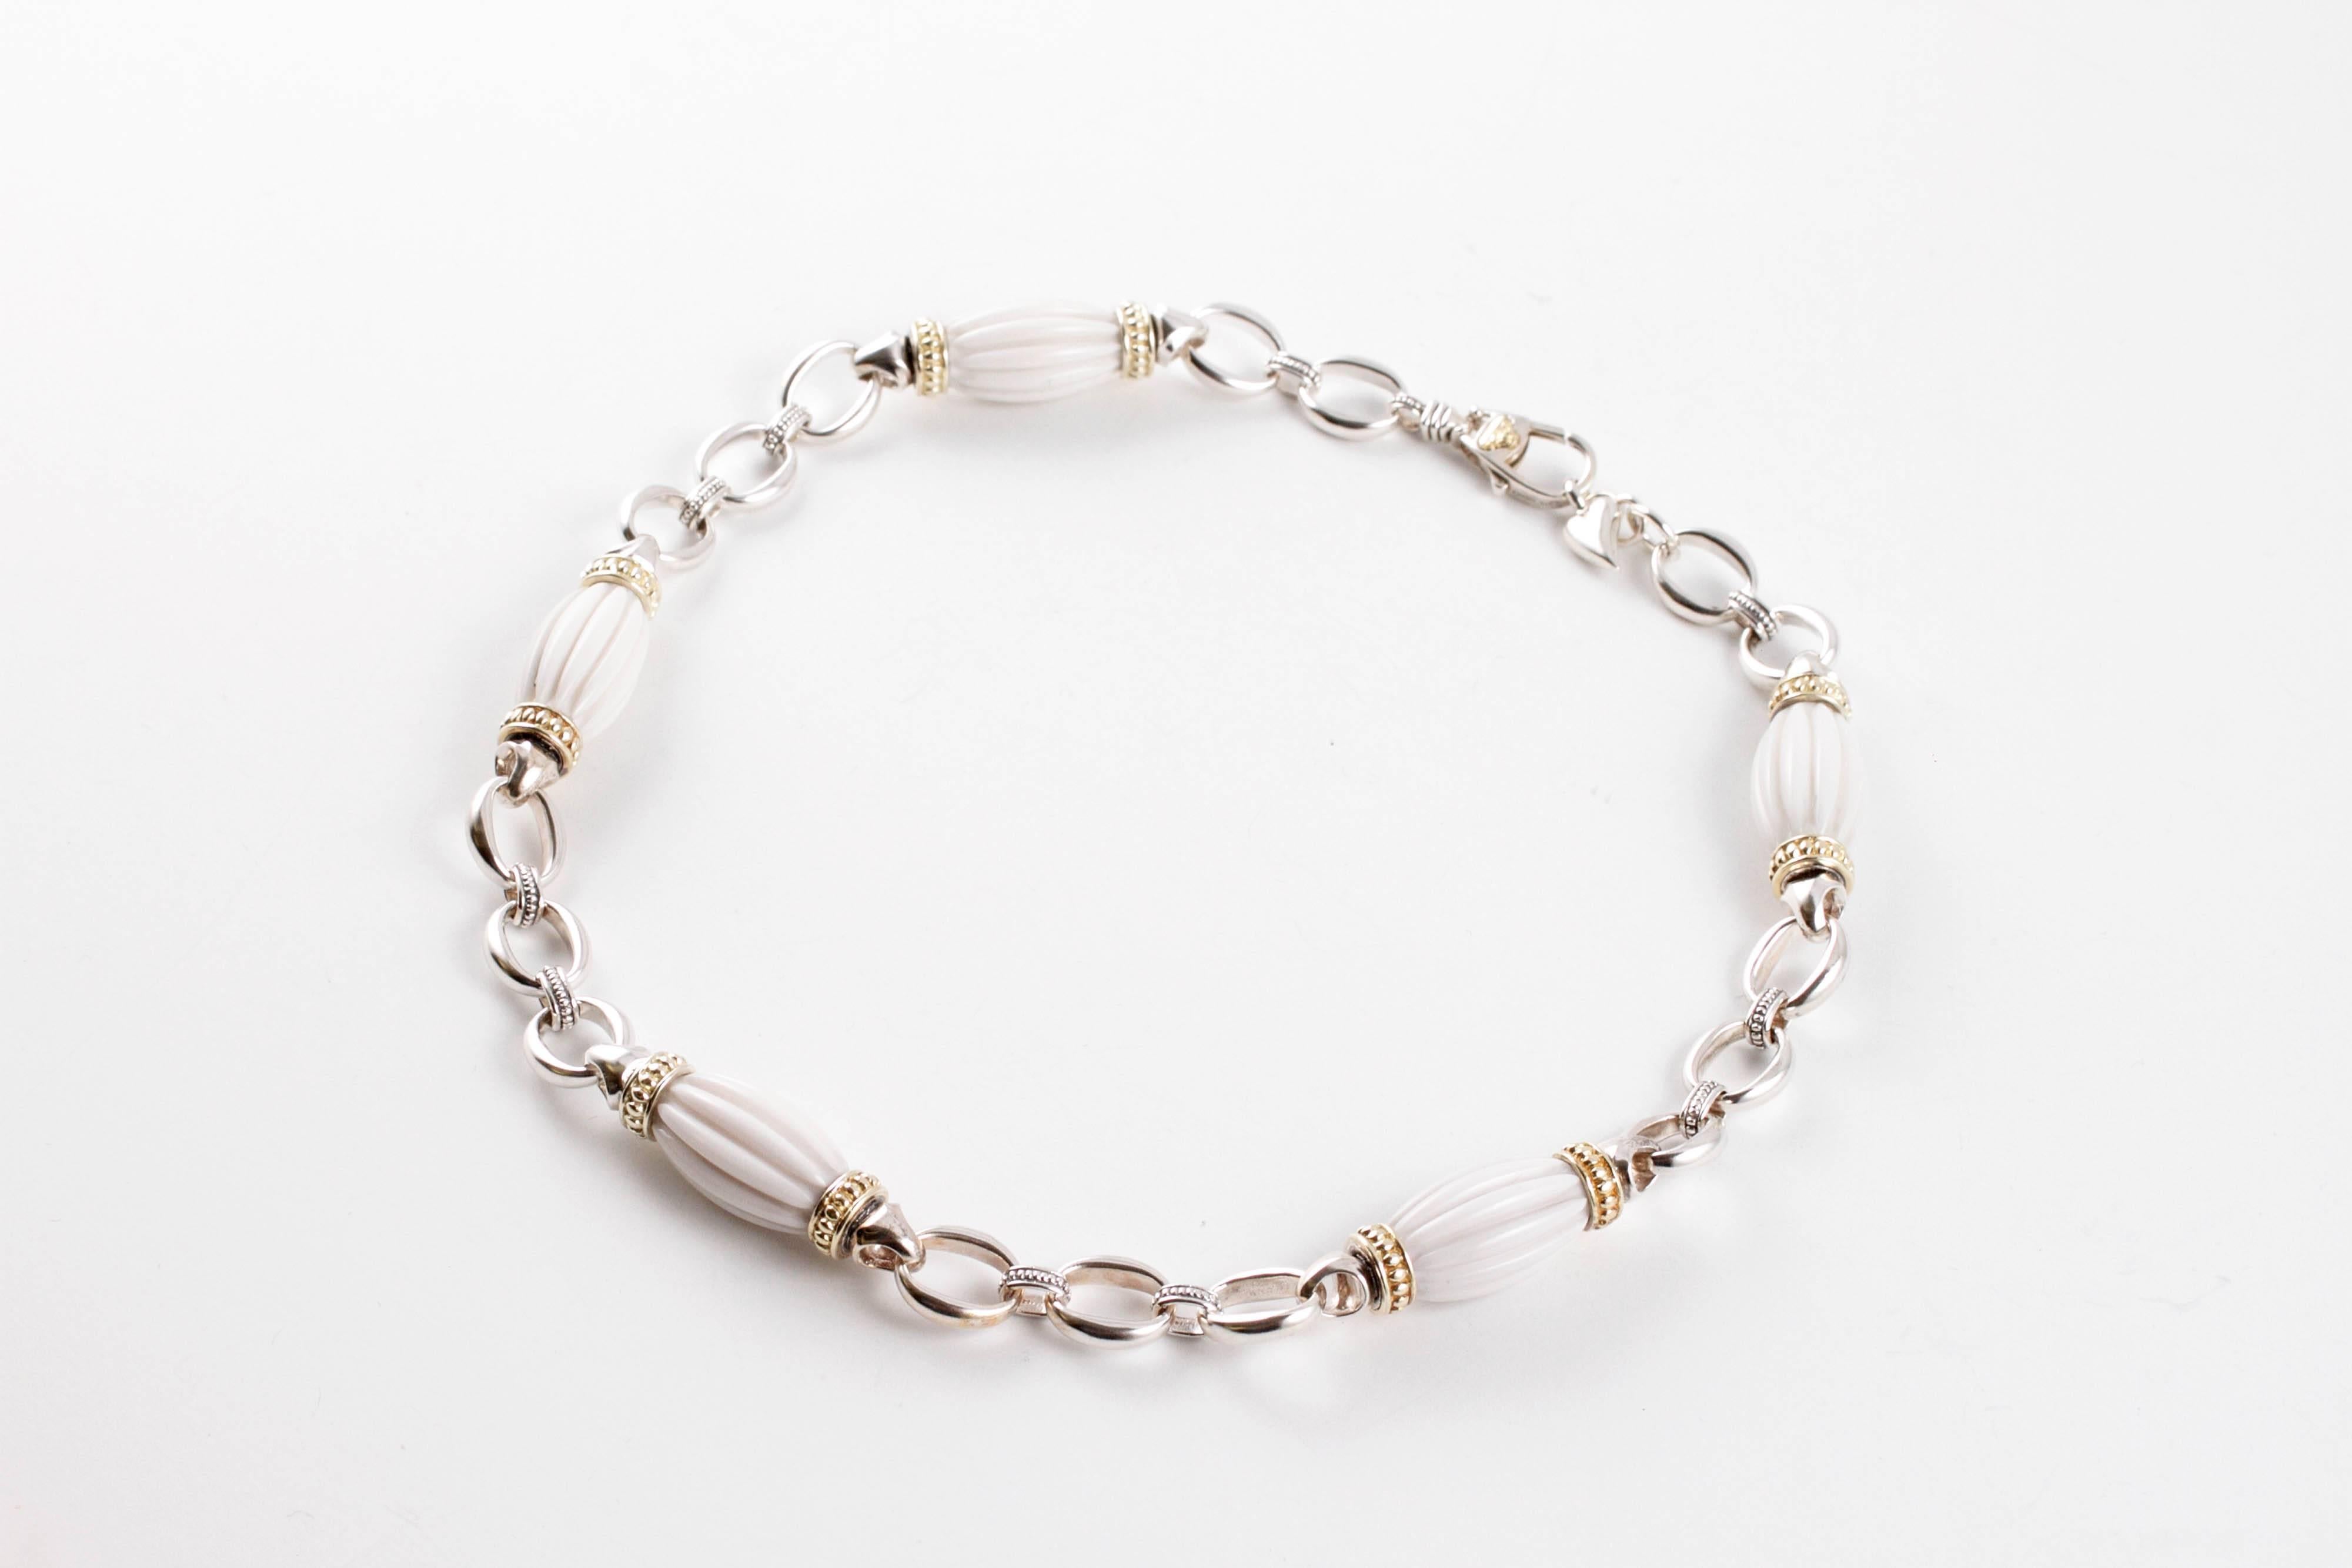 Composed of 18 karat yellow gold and sterling silver, this fun necklace supports five fluted ceramic beads.